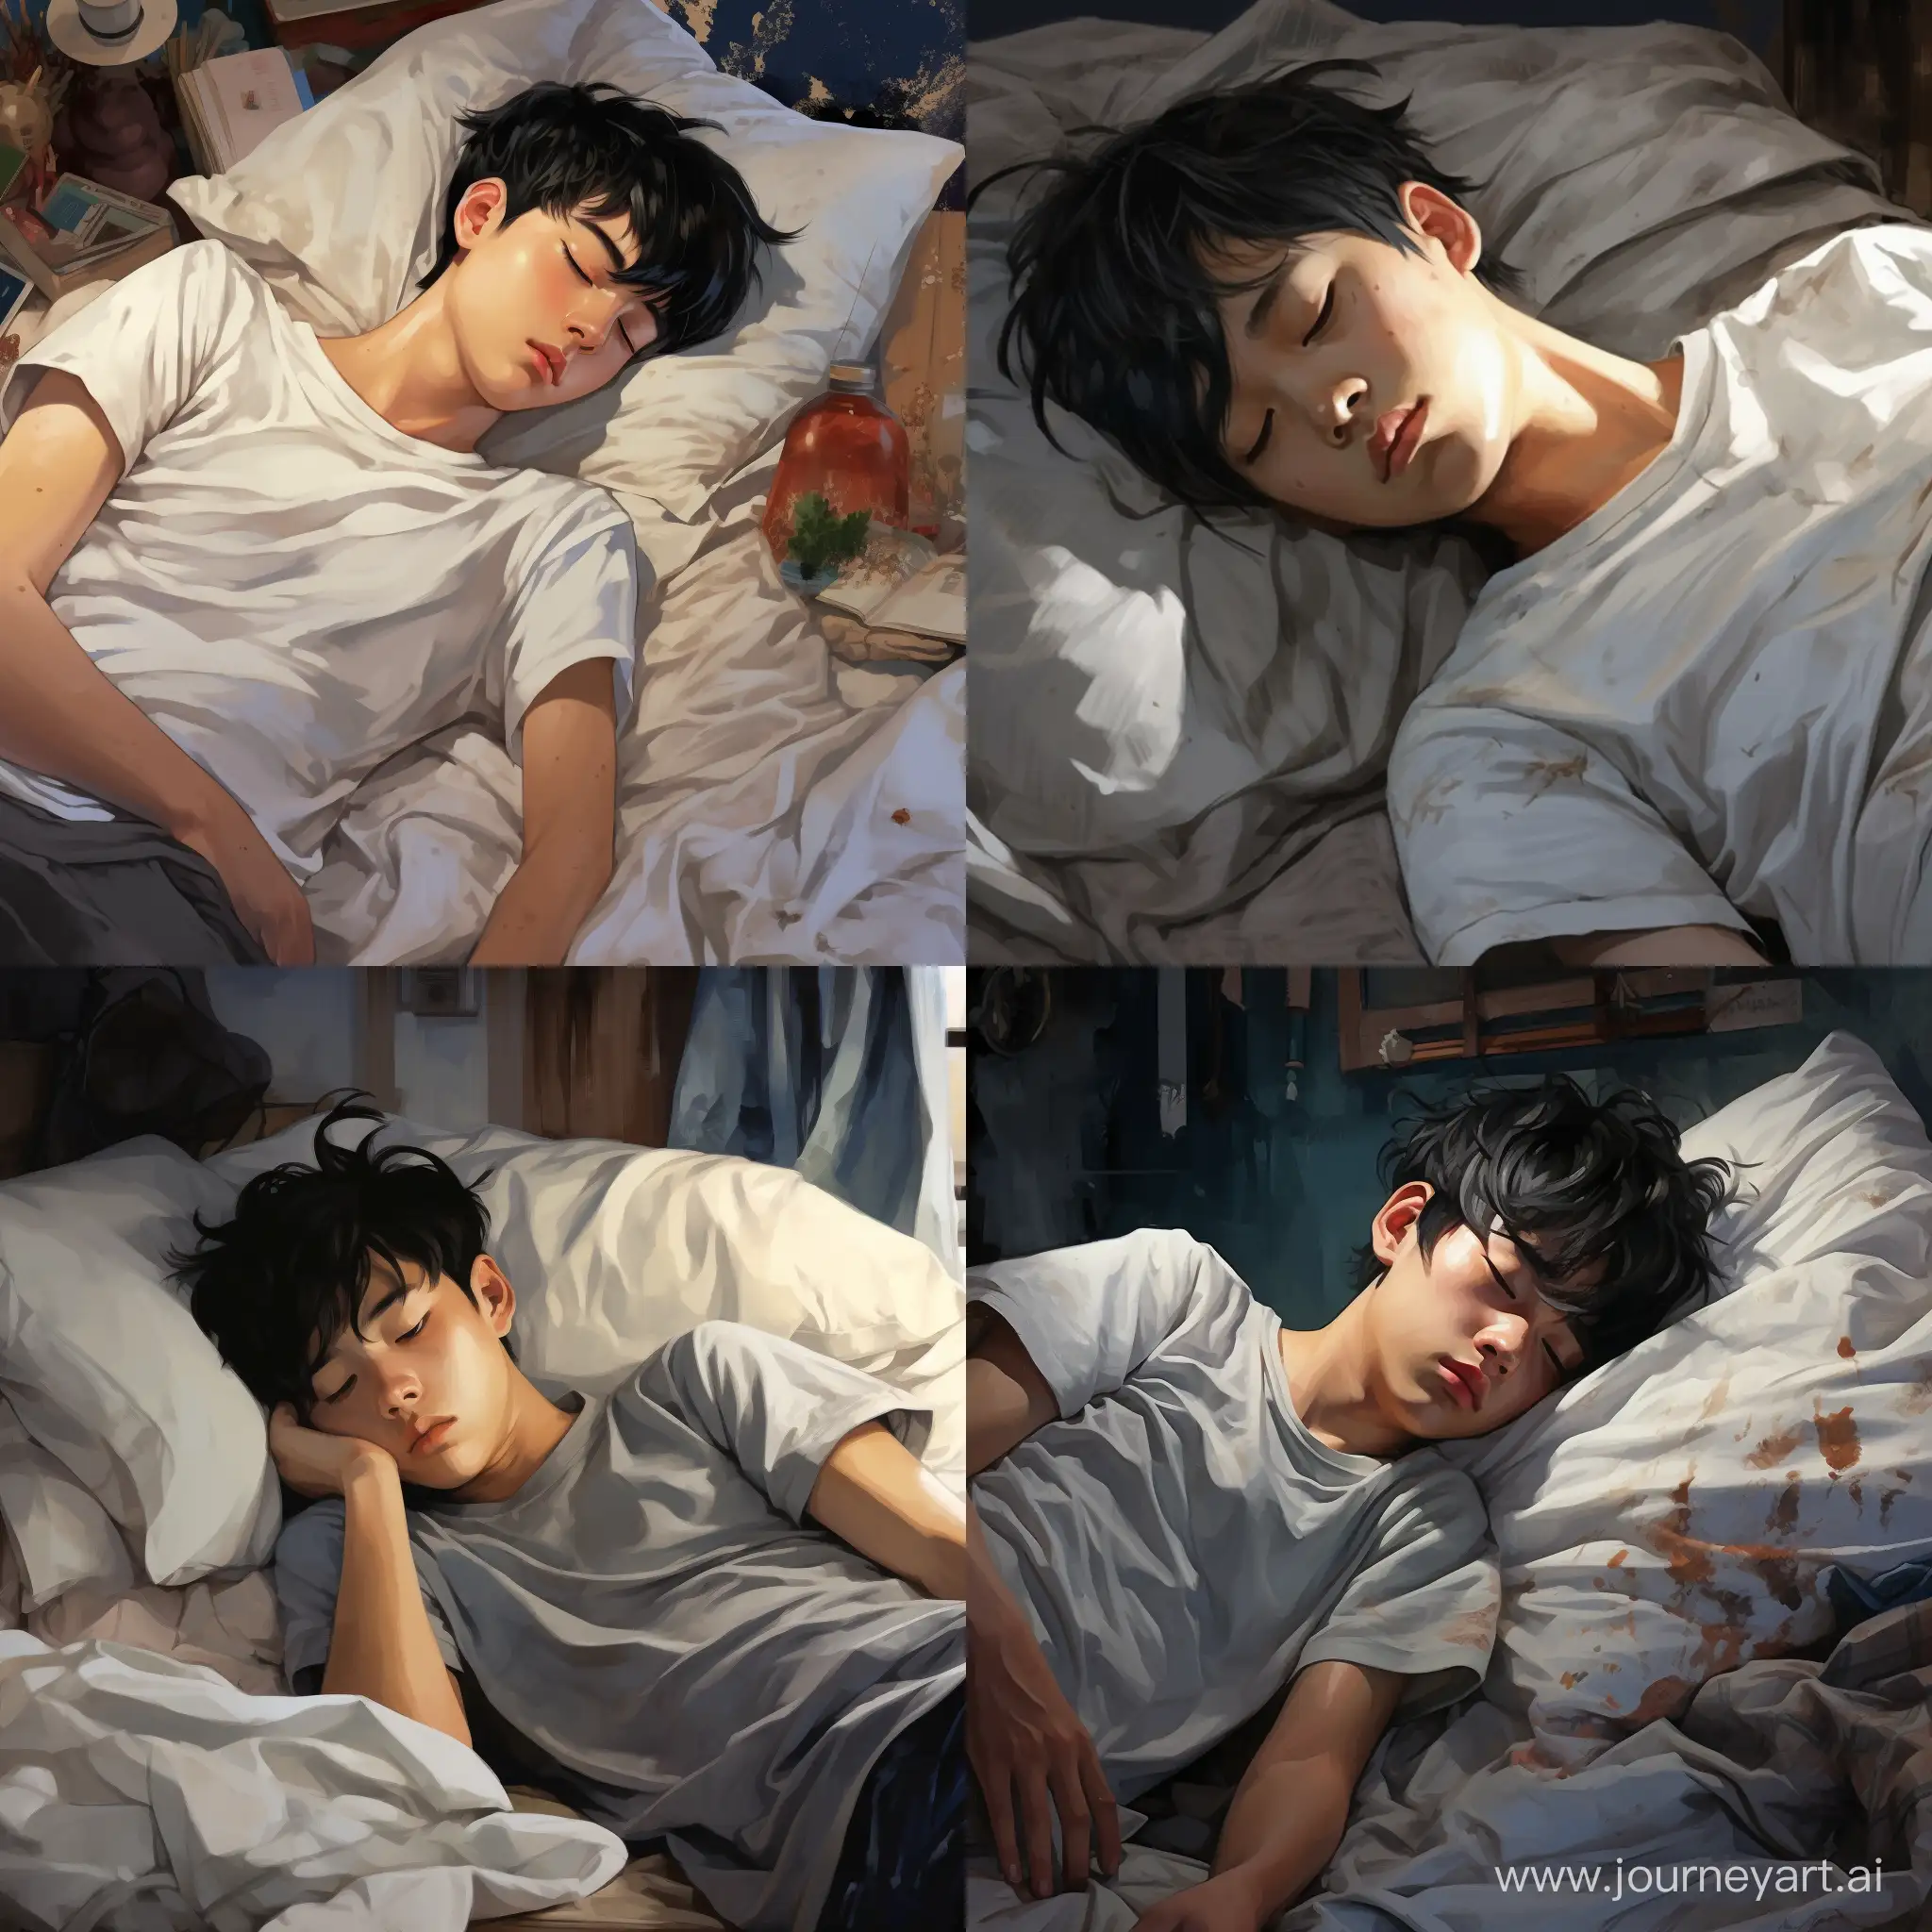 everything can be seen at a distance of 2 meters from an ordinary boy who is 180 cm tall, Asian, his face is not visible, but his features are well visible, his hair covers his eyes, black desert, black hair, he sleeps in a white t-shirt, he is spread out in bed, turned to the left side, the hand is under the desert, in the dark without light in the room, sleeping, the blanket is black, the blanket is covered to the waist of the body

